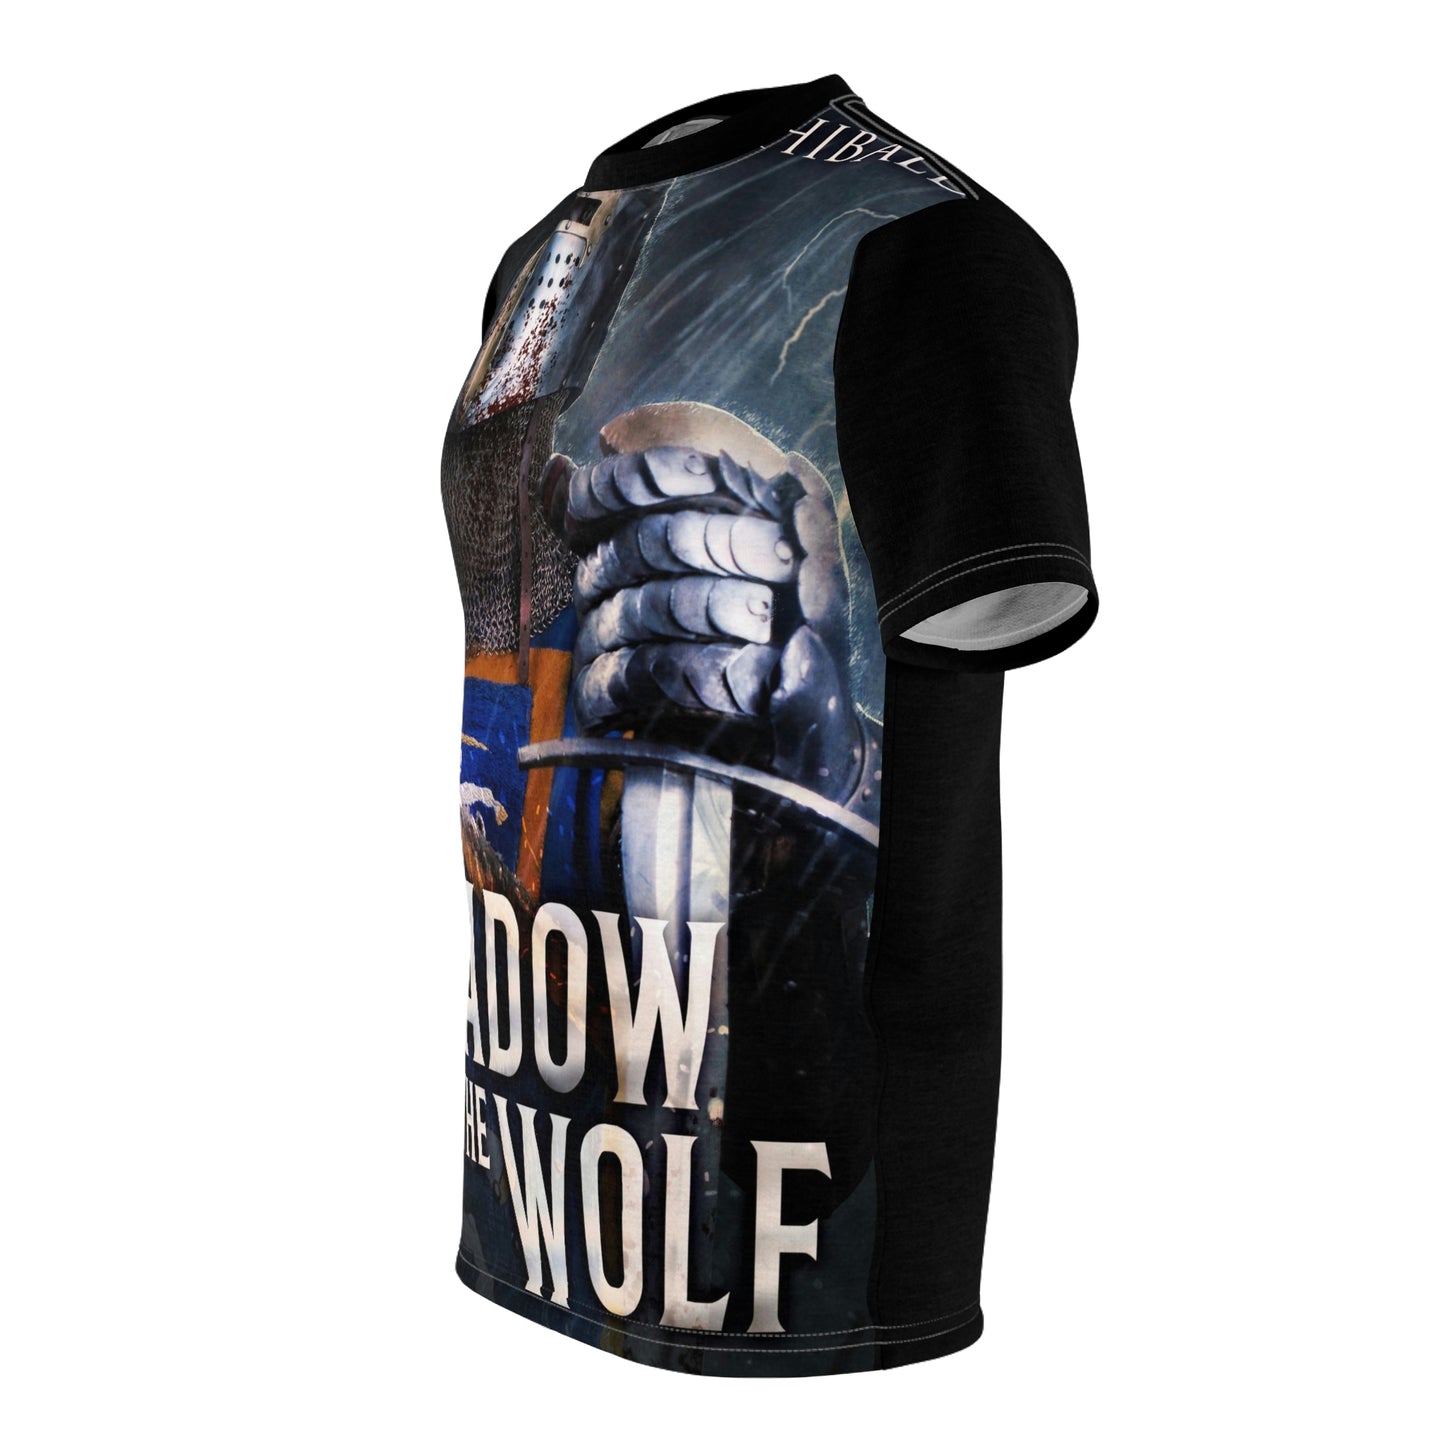 Shadow of the Wolf - Unisex All-Over Print Cut & Sew T-Shirt